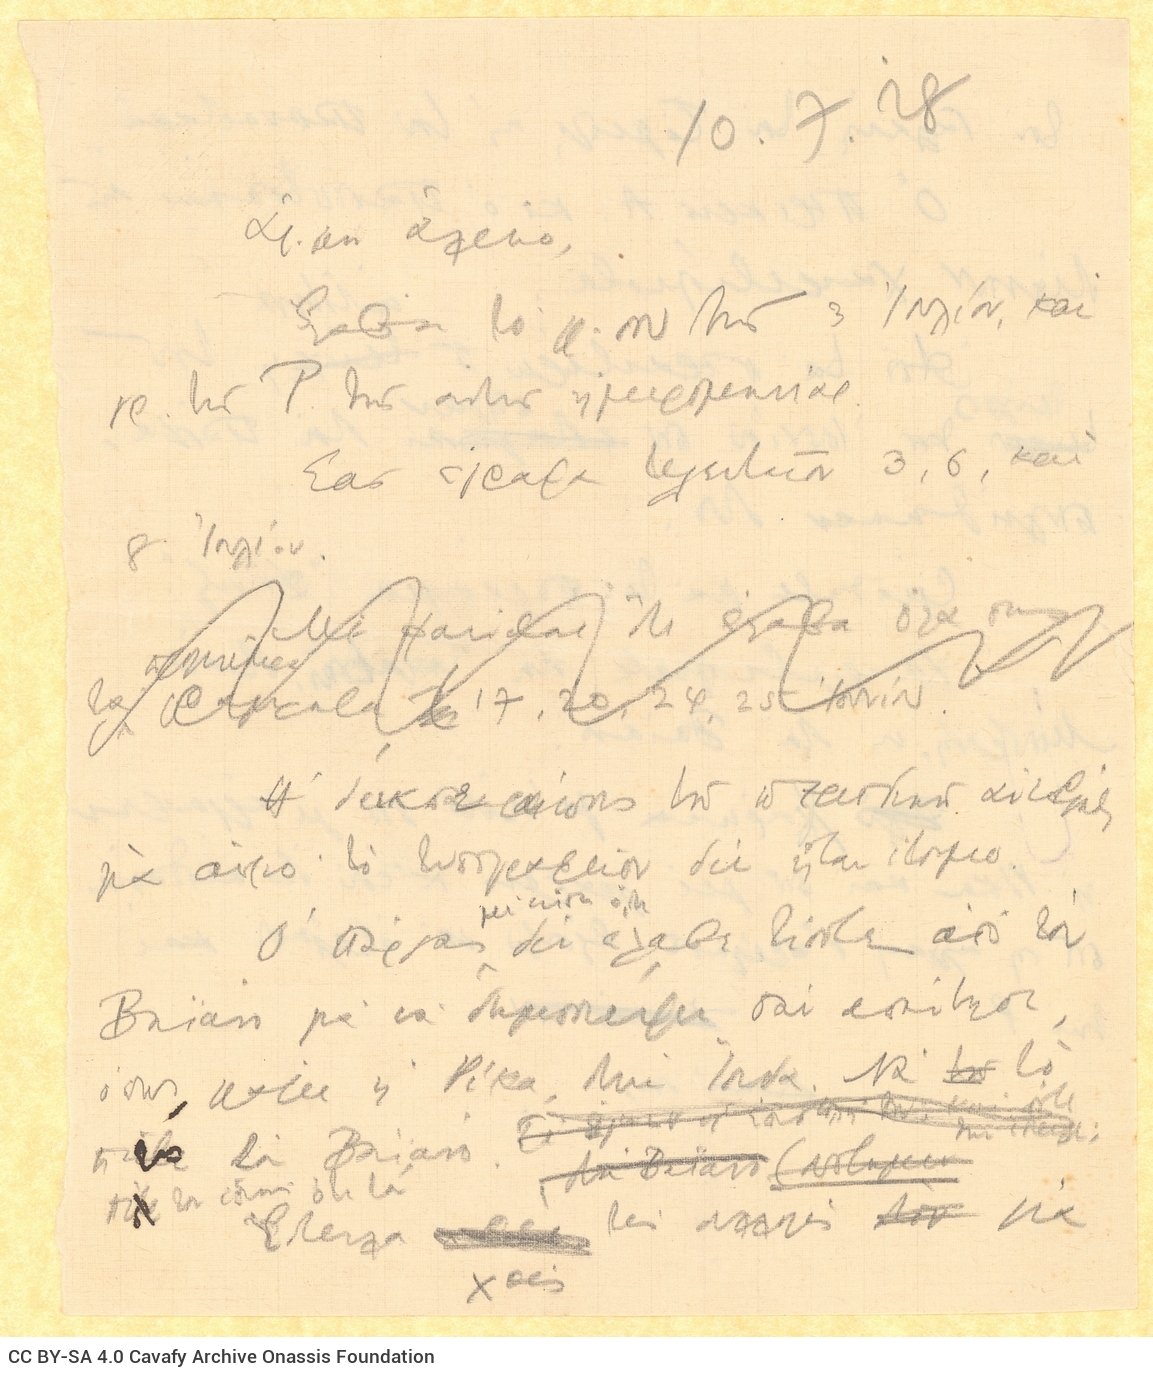 Handwritten draft letter to Alekos [Singopoulo] on both sides of a sheet. Cavafy refers to his correspondence with the Singop